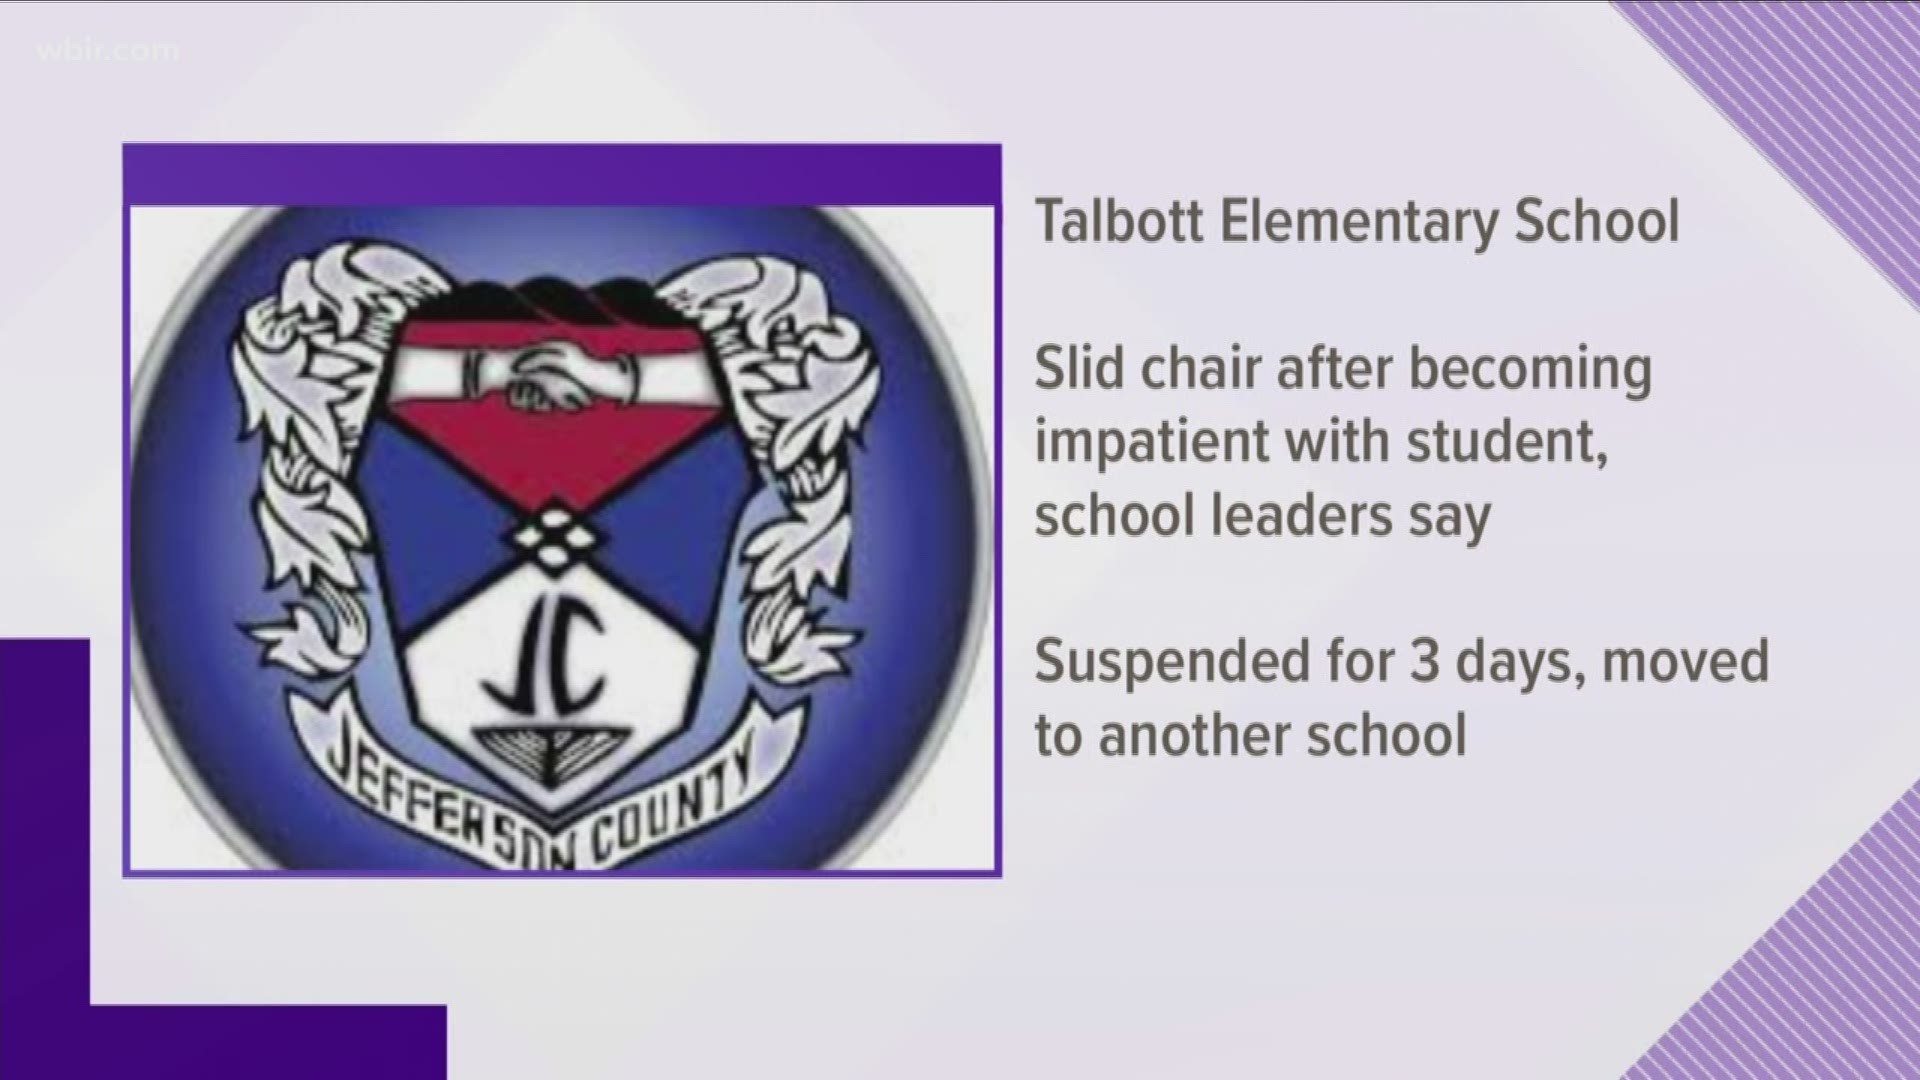 School leaders say a first-grade teacher became with impatient with a student and slid a chair across the room causing the chair to flip over and break.